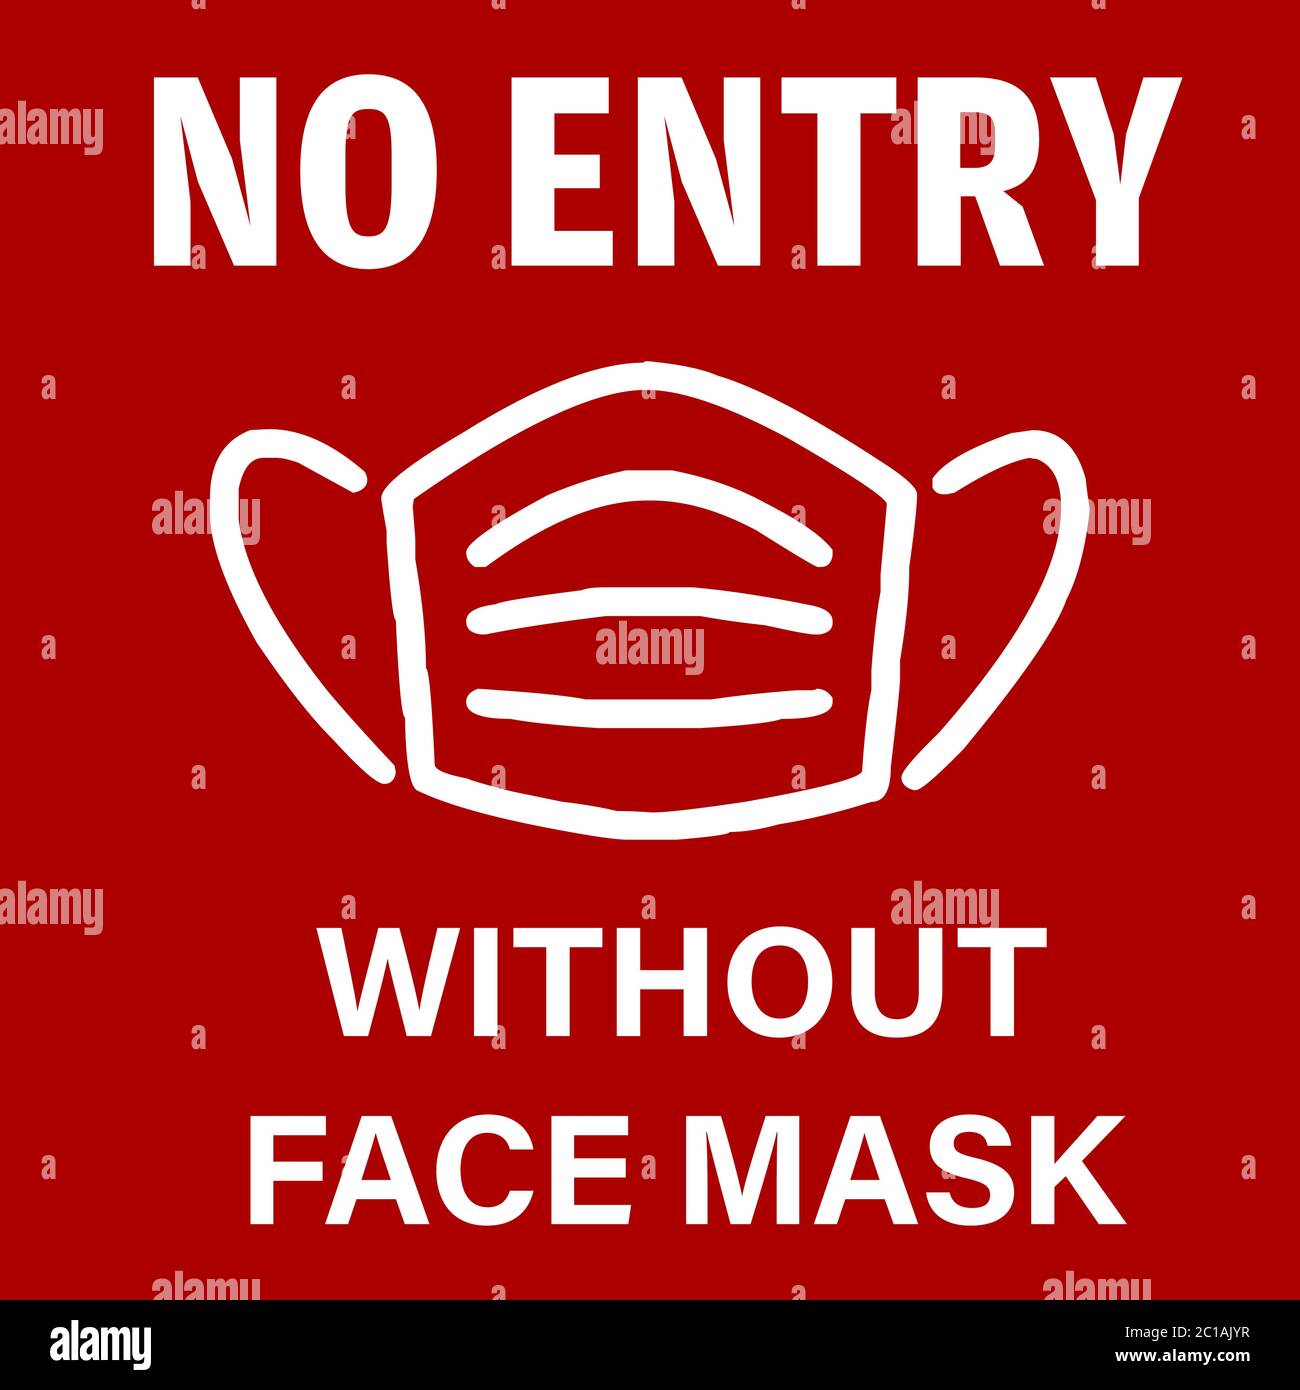 No Entry without Face Mask pictogram vector illustration to protect from COVID-19 Coronavirus Pandemic. Stock Vector